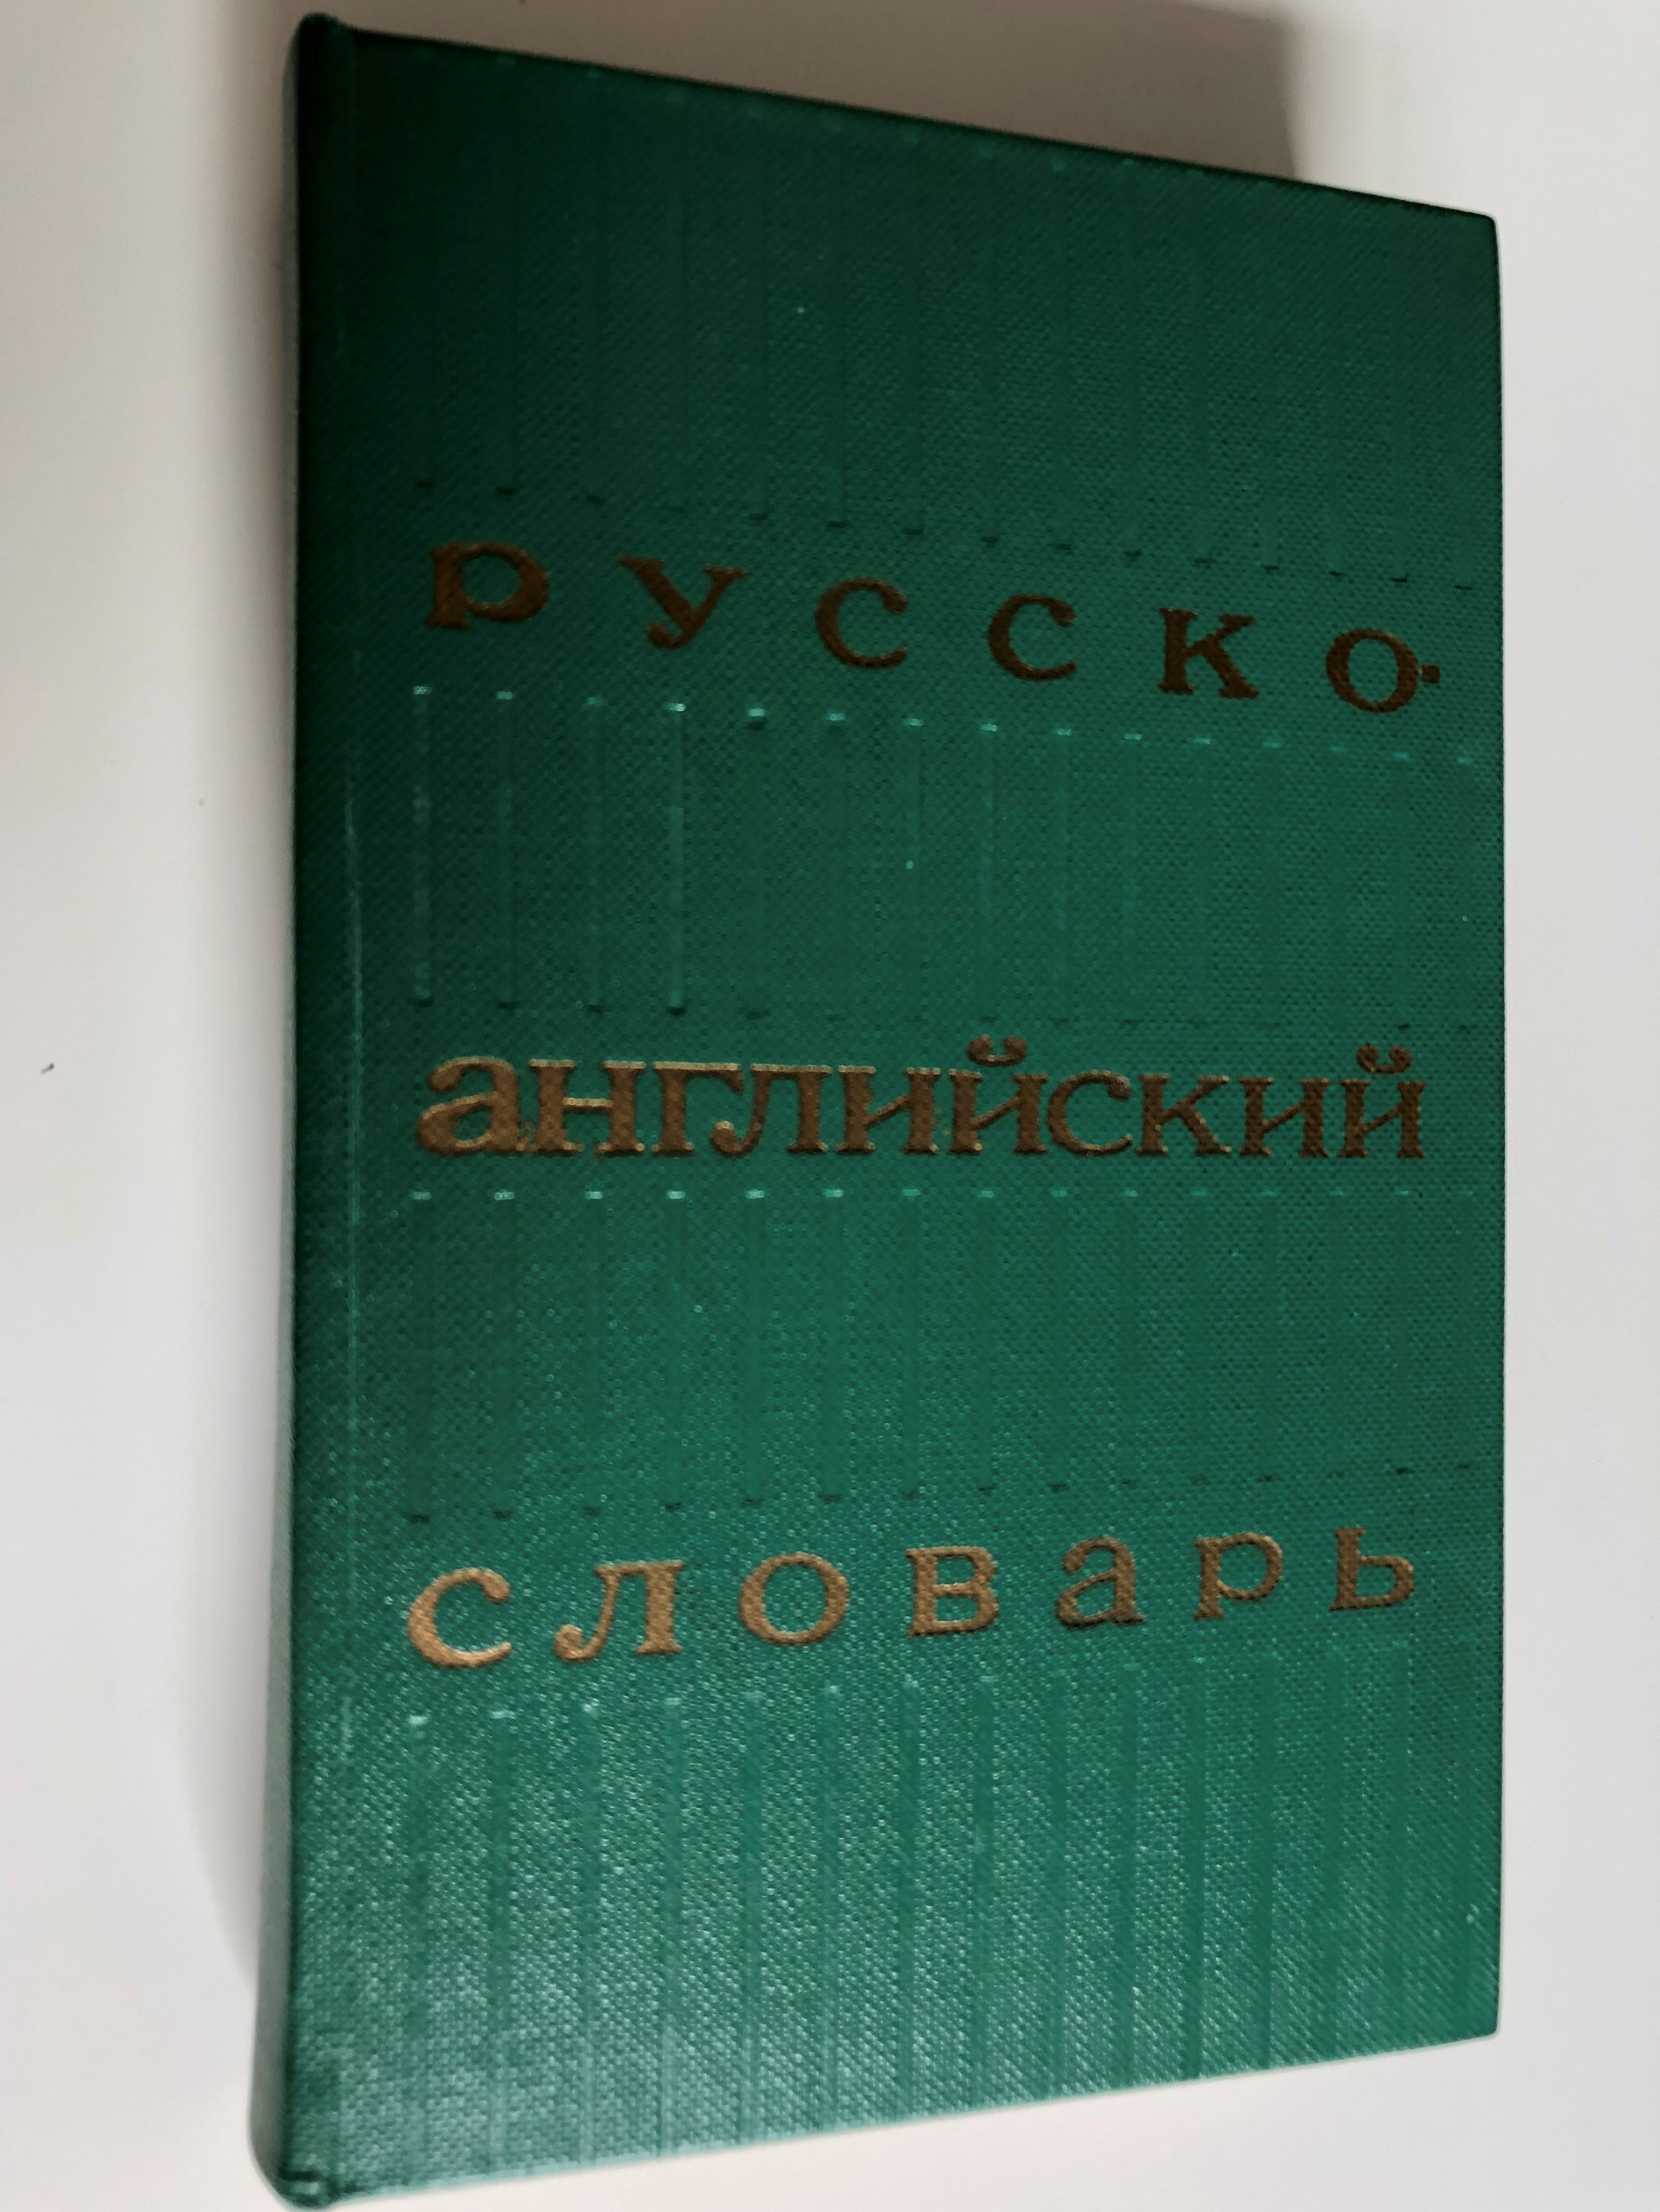 russian-english-dictionary-by-o.-s.-akhmanova-elizabeth-a.-m.-wilson-25000-words-approx.-25000-.-29th-stereotype-edition-moscow-1978-1-.jpg